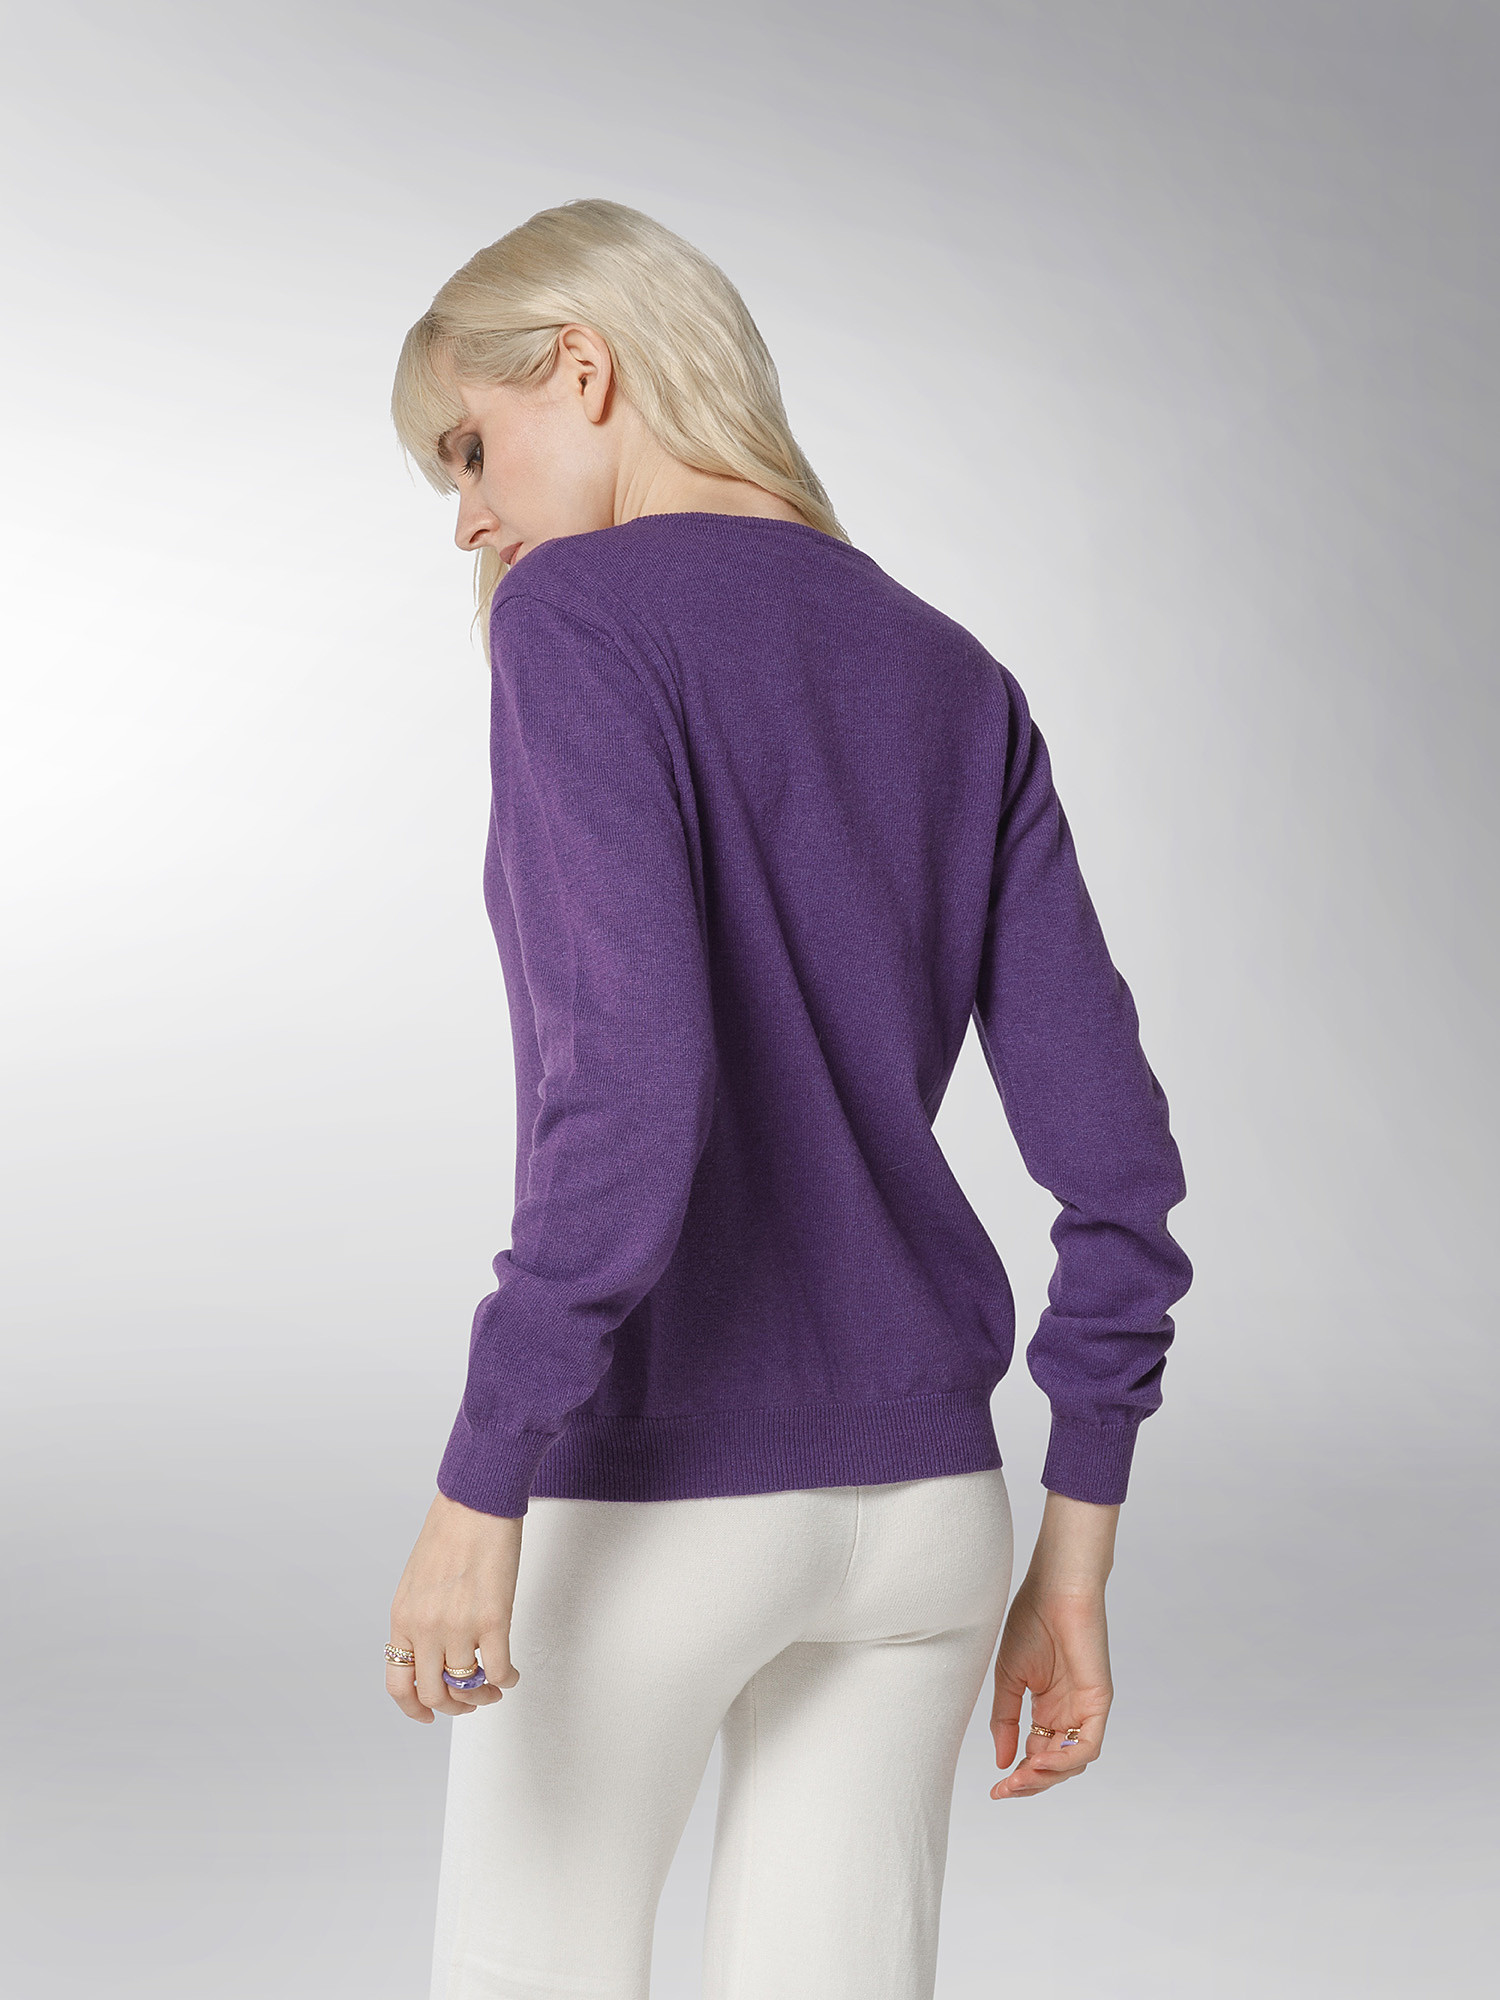 K Collection - Cardigan, Purple, large image number 4